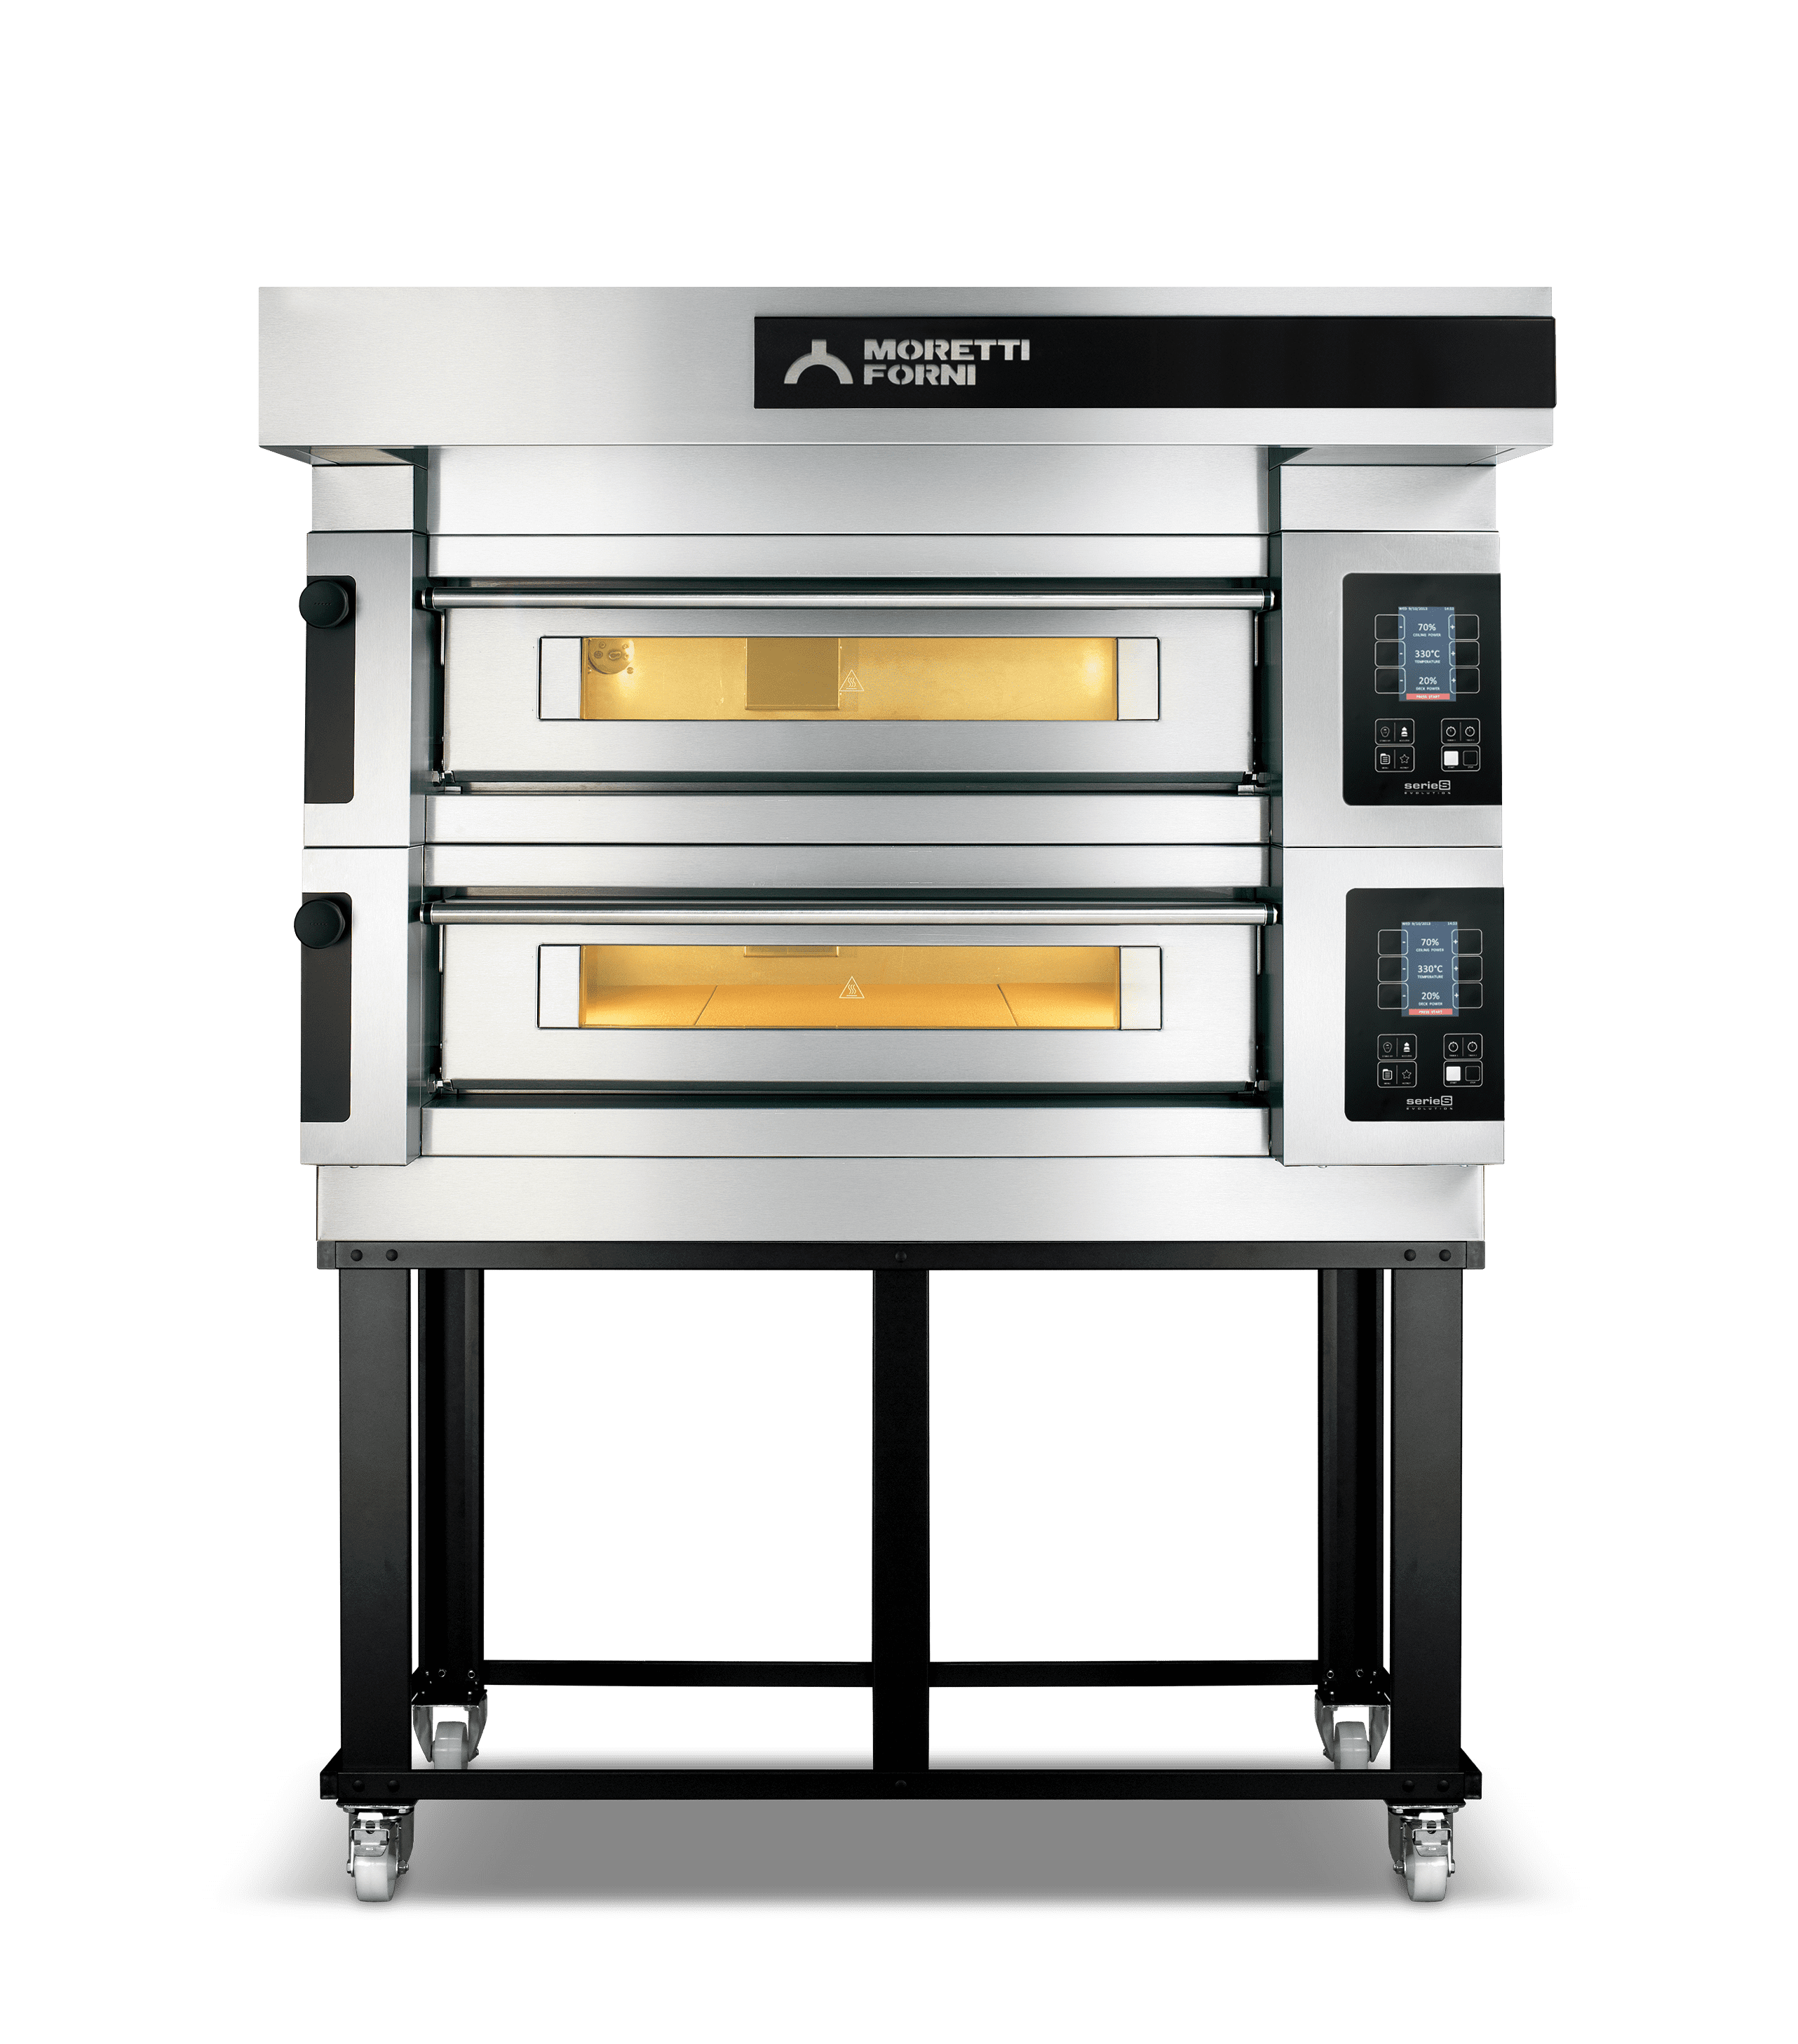 S105E2 - serie S modular Electric Pizza oven 37-1/2"x49-3/4"x6-1/4" (Chamber)